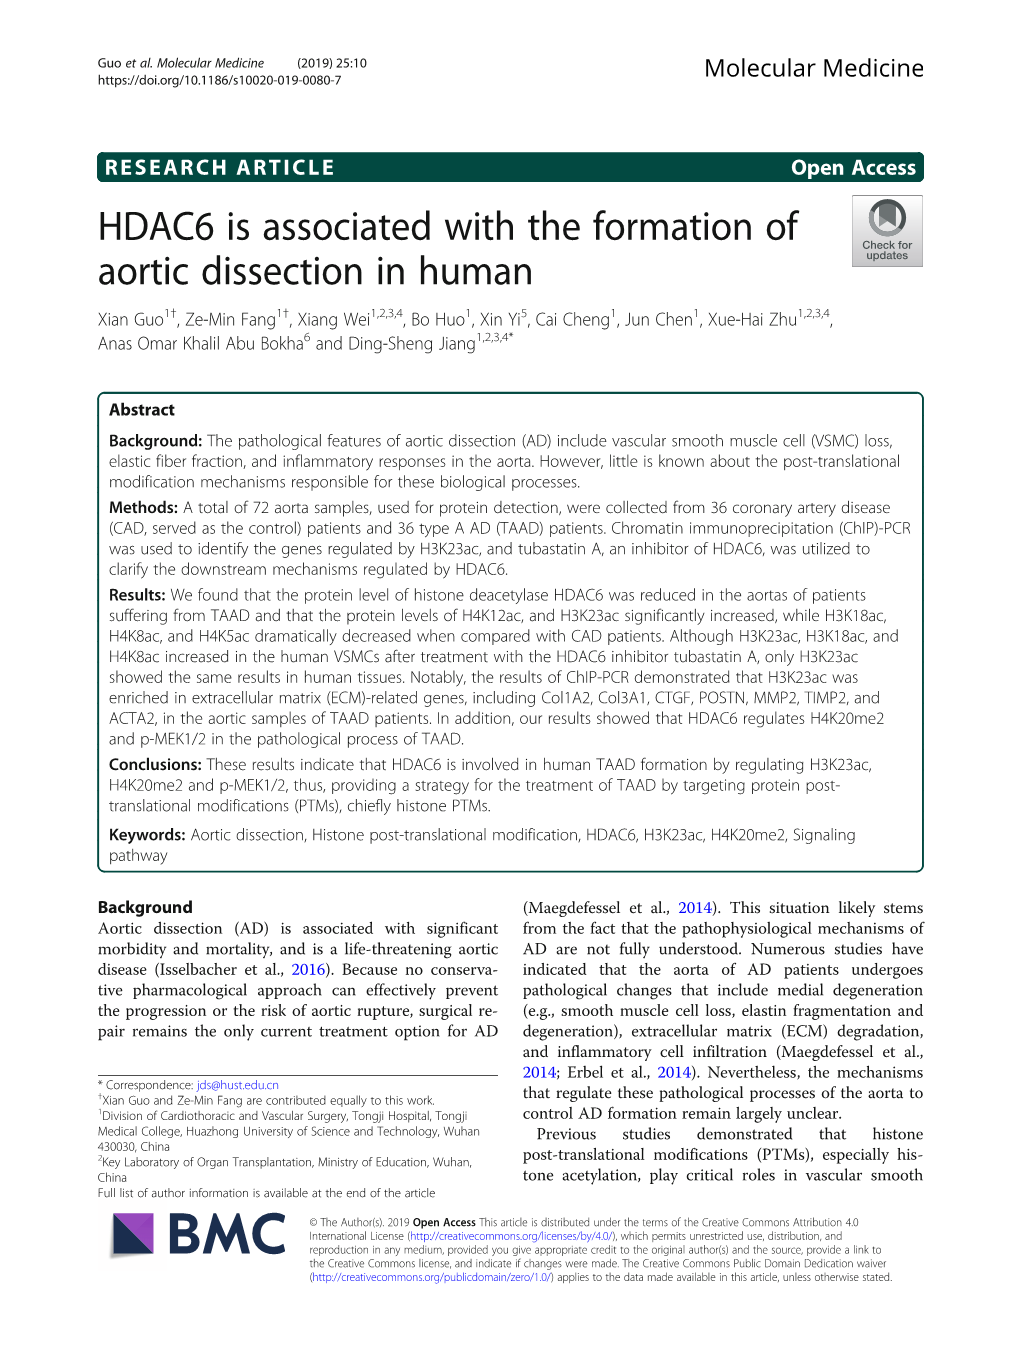 HDAC6 Is Associated with the Formation of Aortic Dissection In